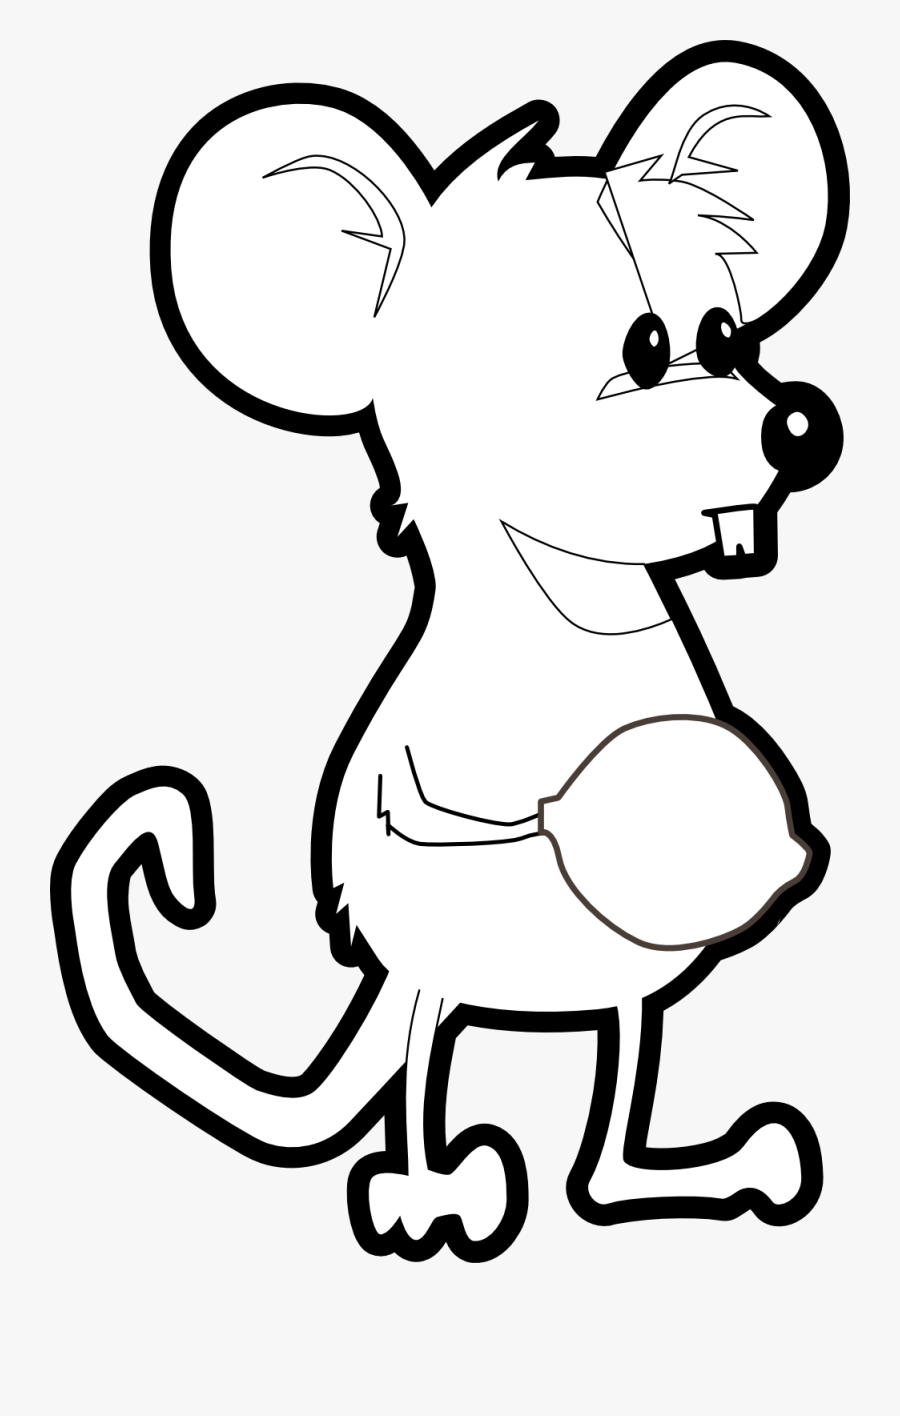 Computer - Mouse - Clipart - Black - And - White - Cartoon Rat Clipart Black And White, Transparent Clipart